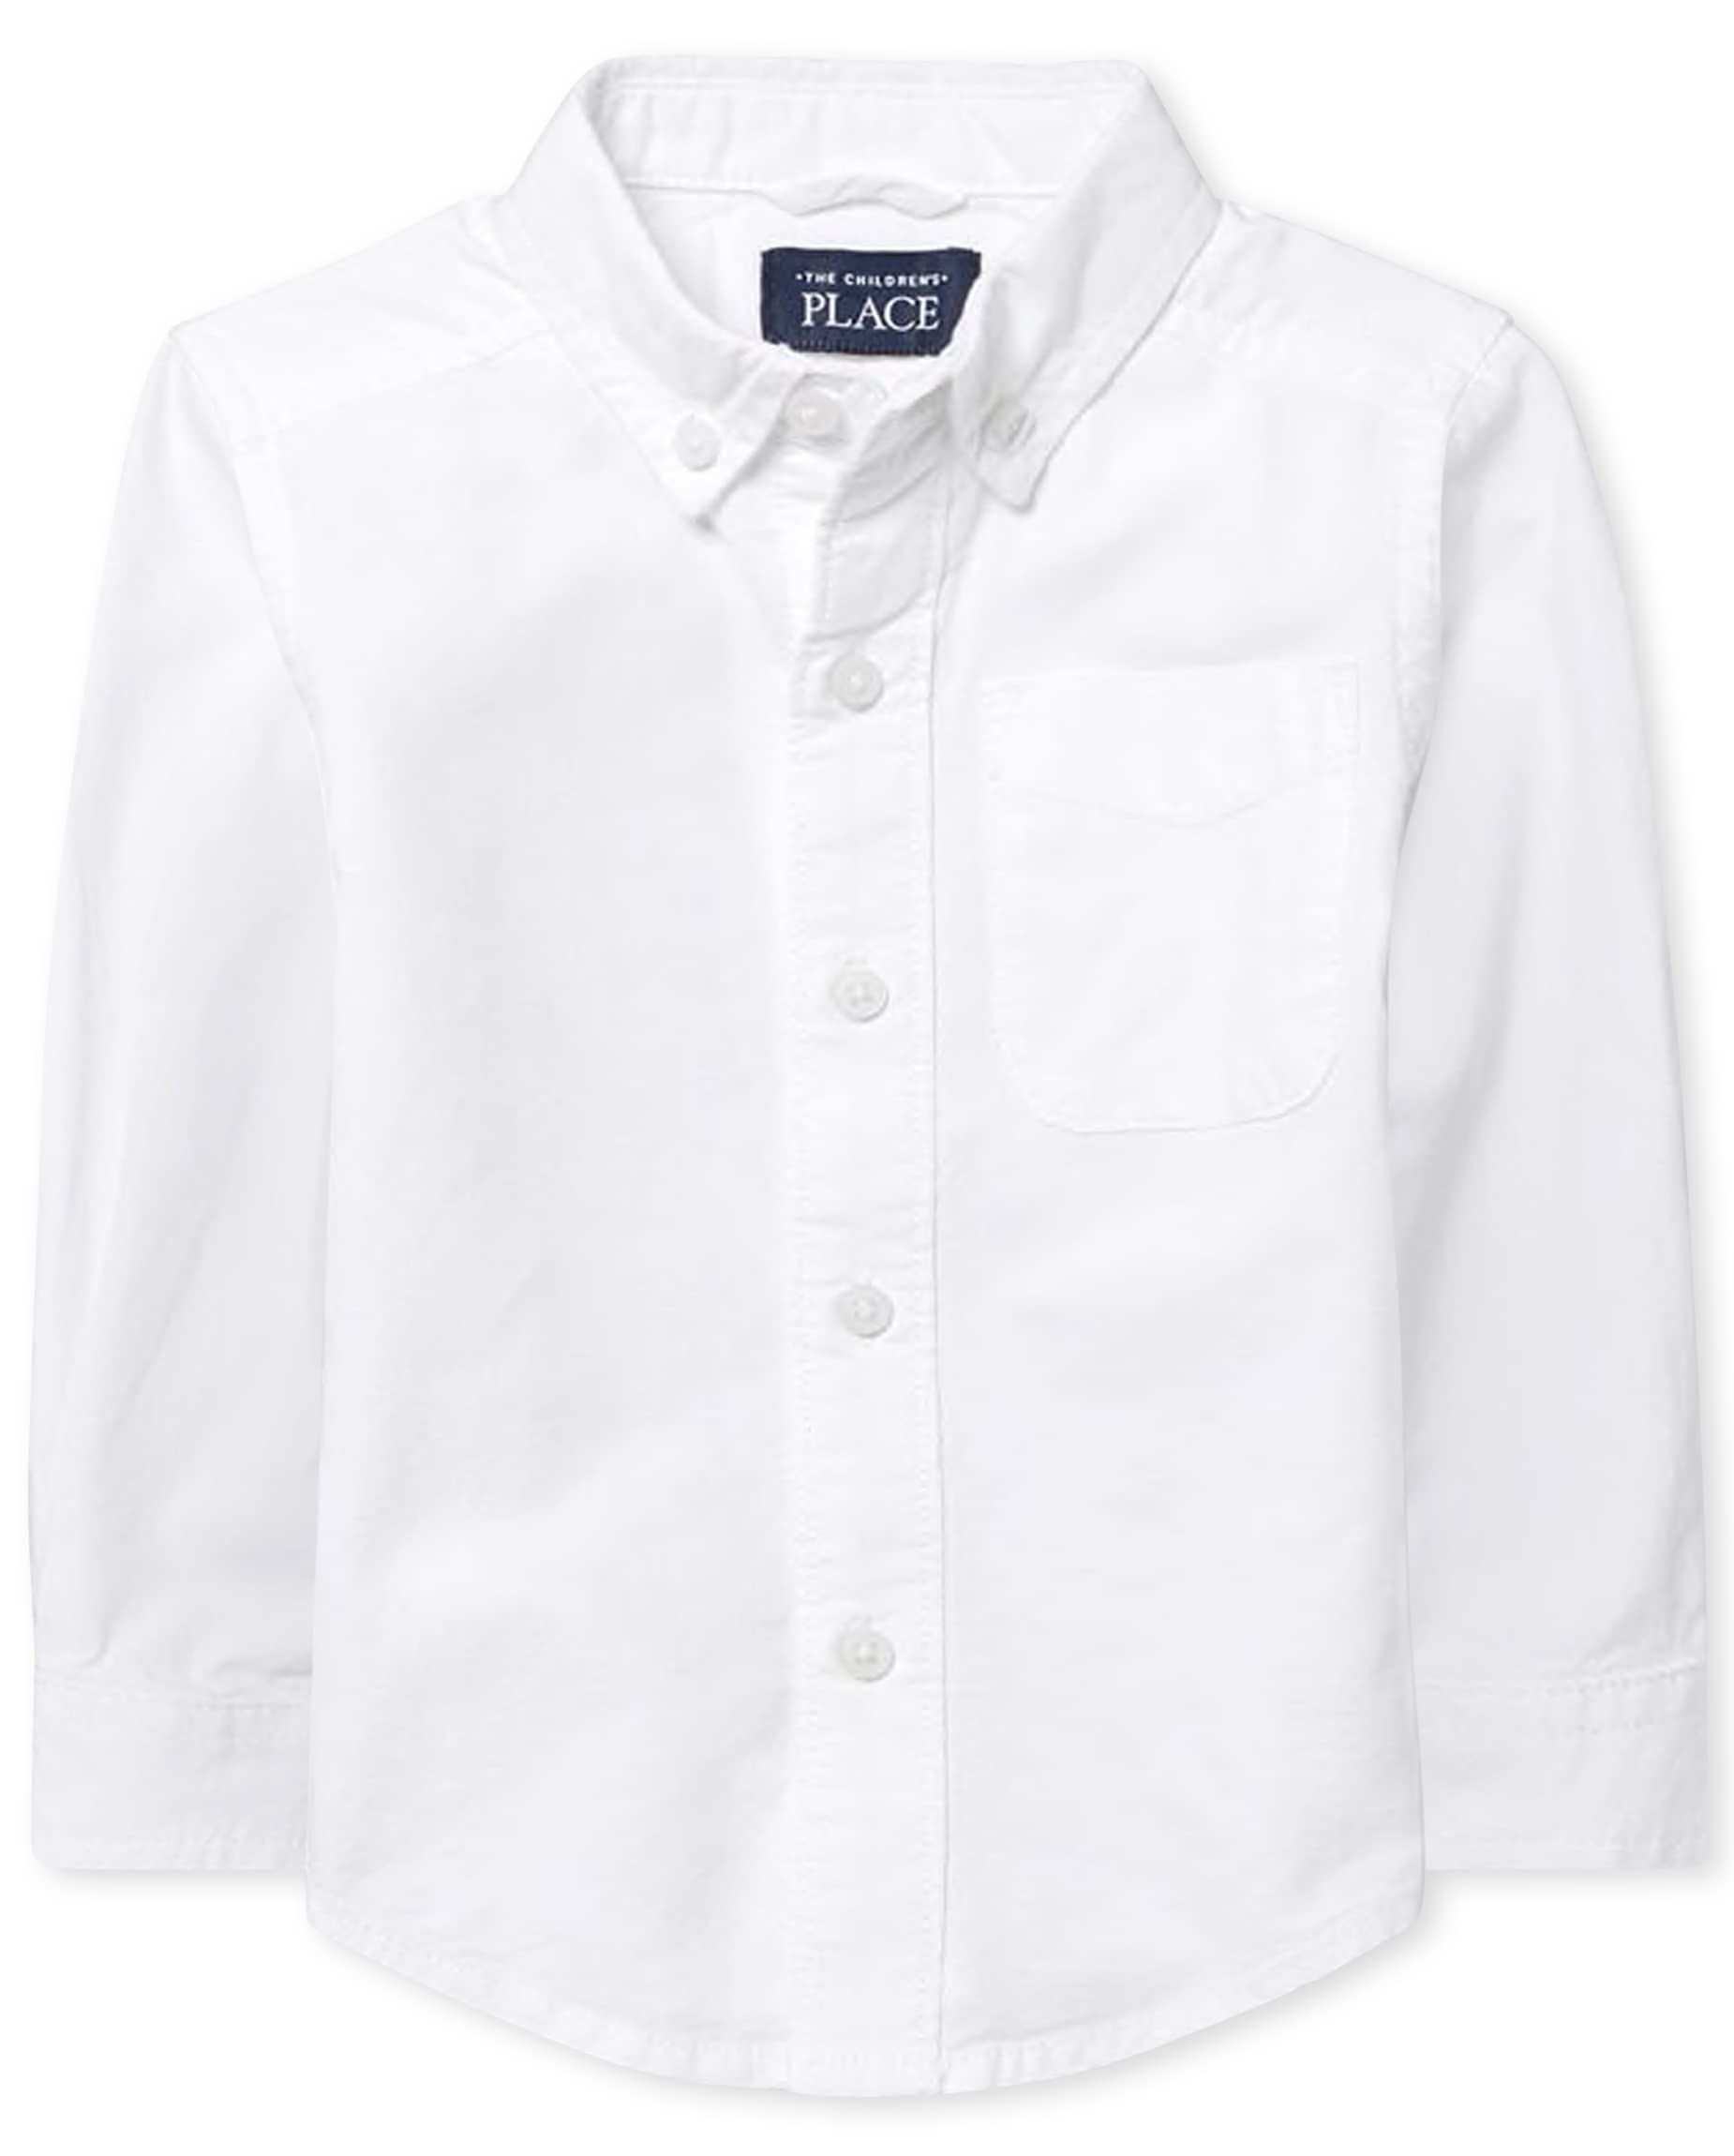 The Children's Place Baby Single and Toddler Boys Long Sleeve Oxford Button Down Shirt